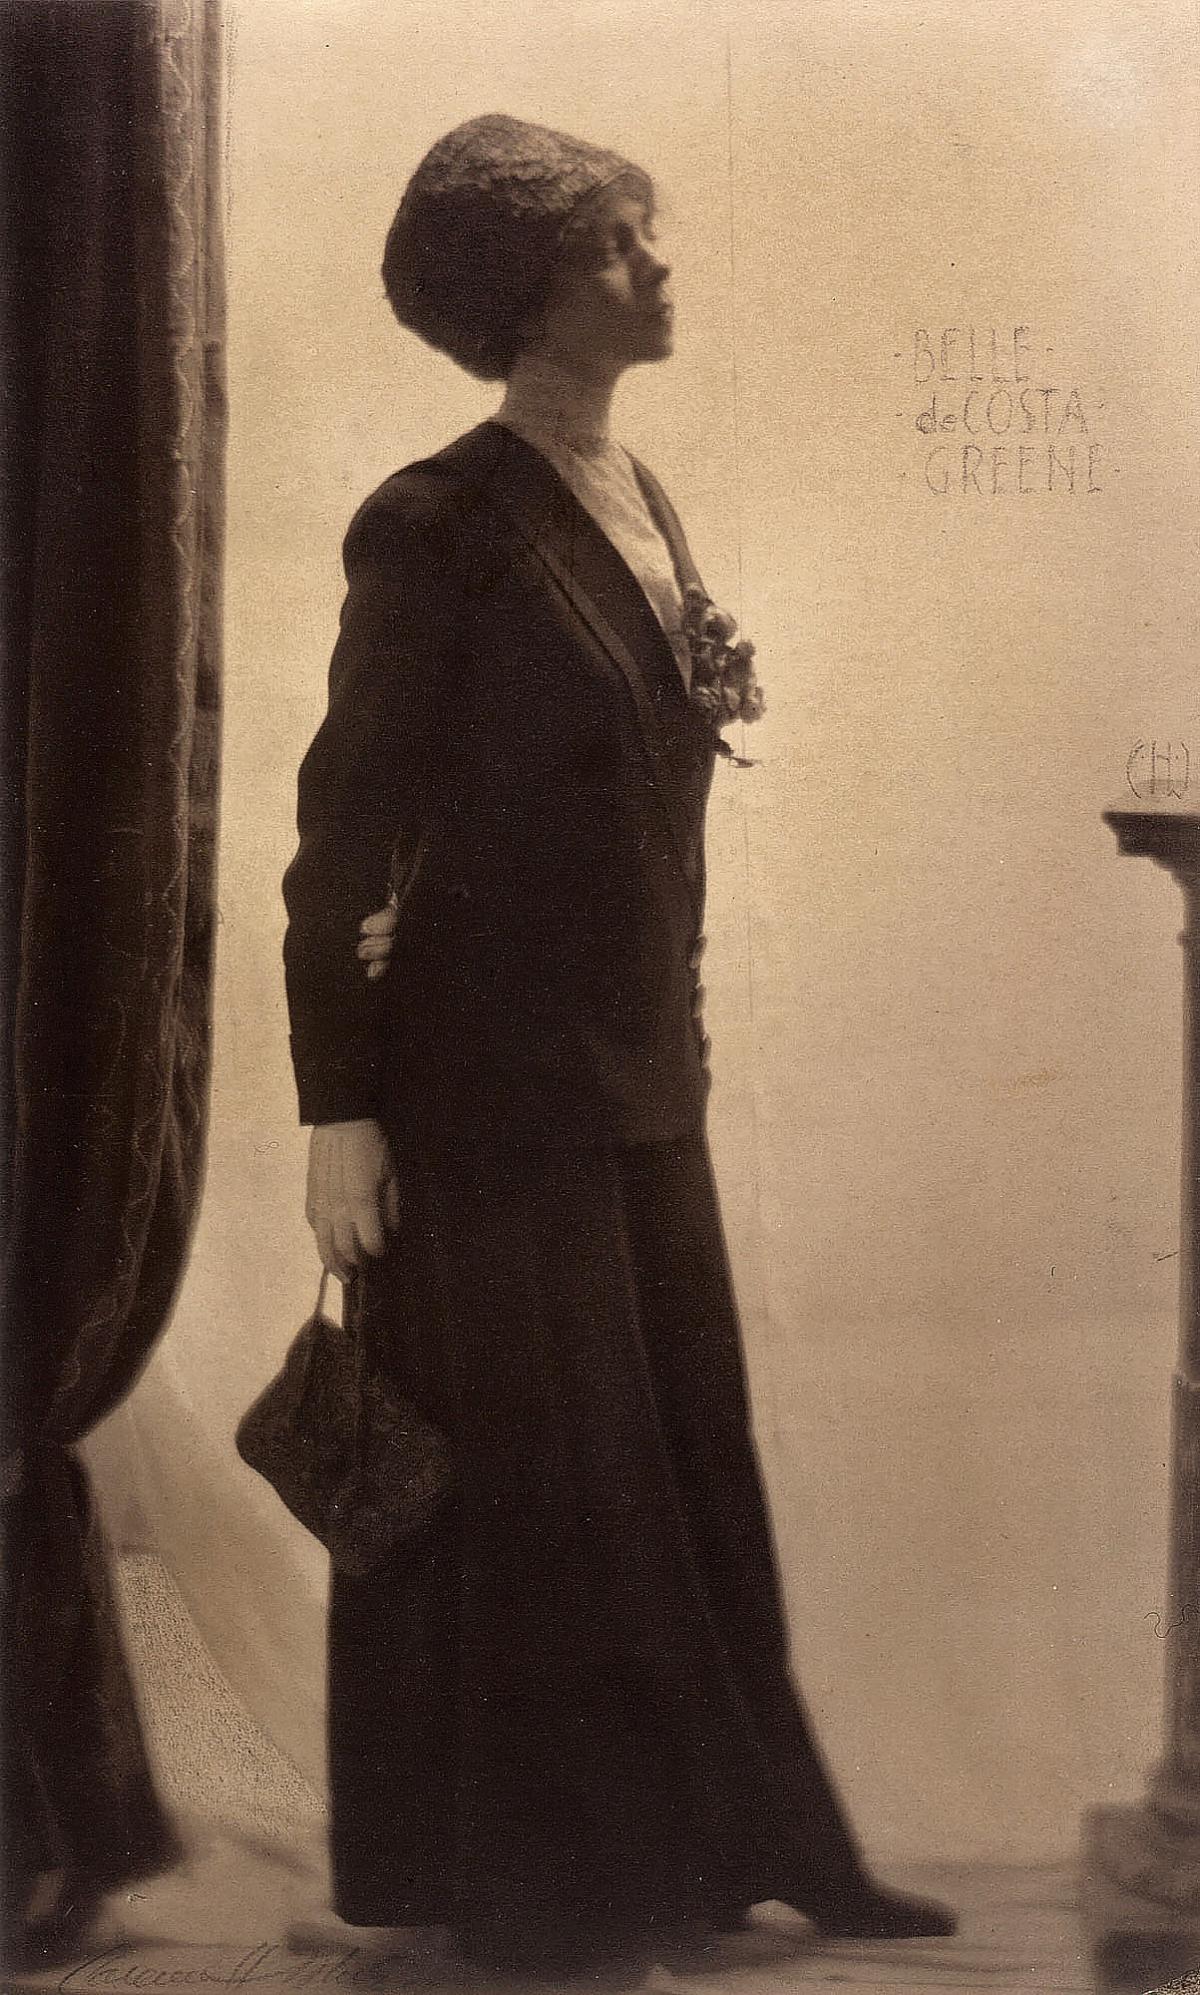 Greene, in a long black dress and cap, chin raised